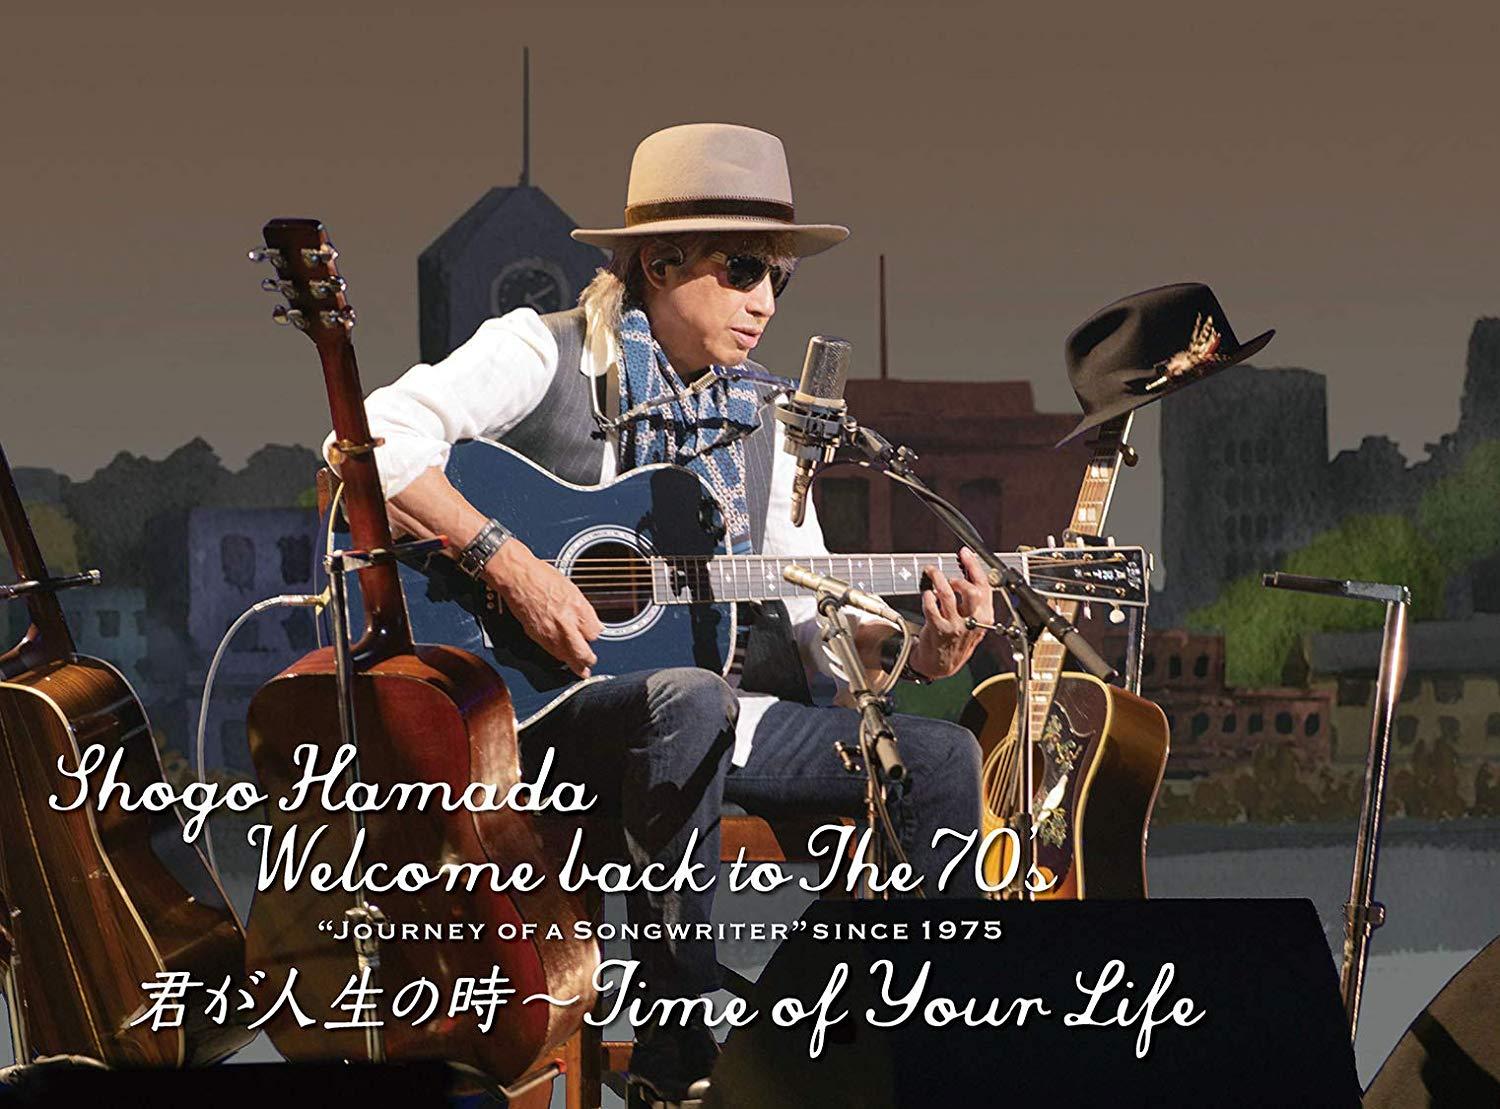 Welcome back to The 70 sgJourney of a Songwriter since 1975uNl̎`Time of Your Lifev(SY) lcȌ SME Records